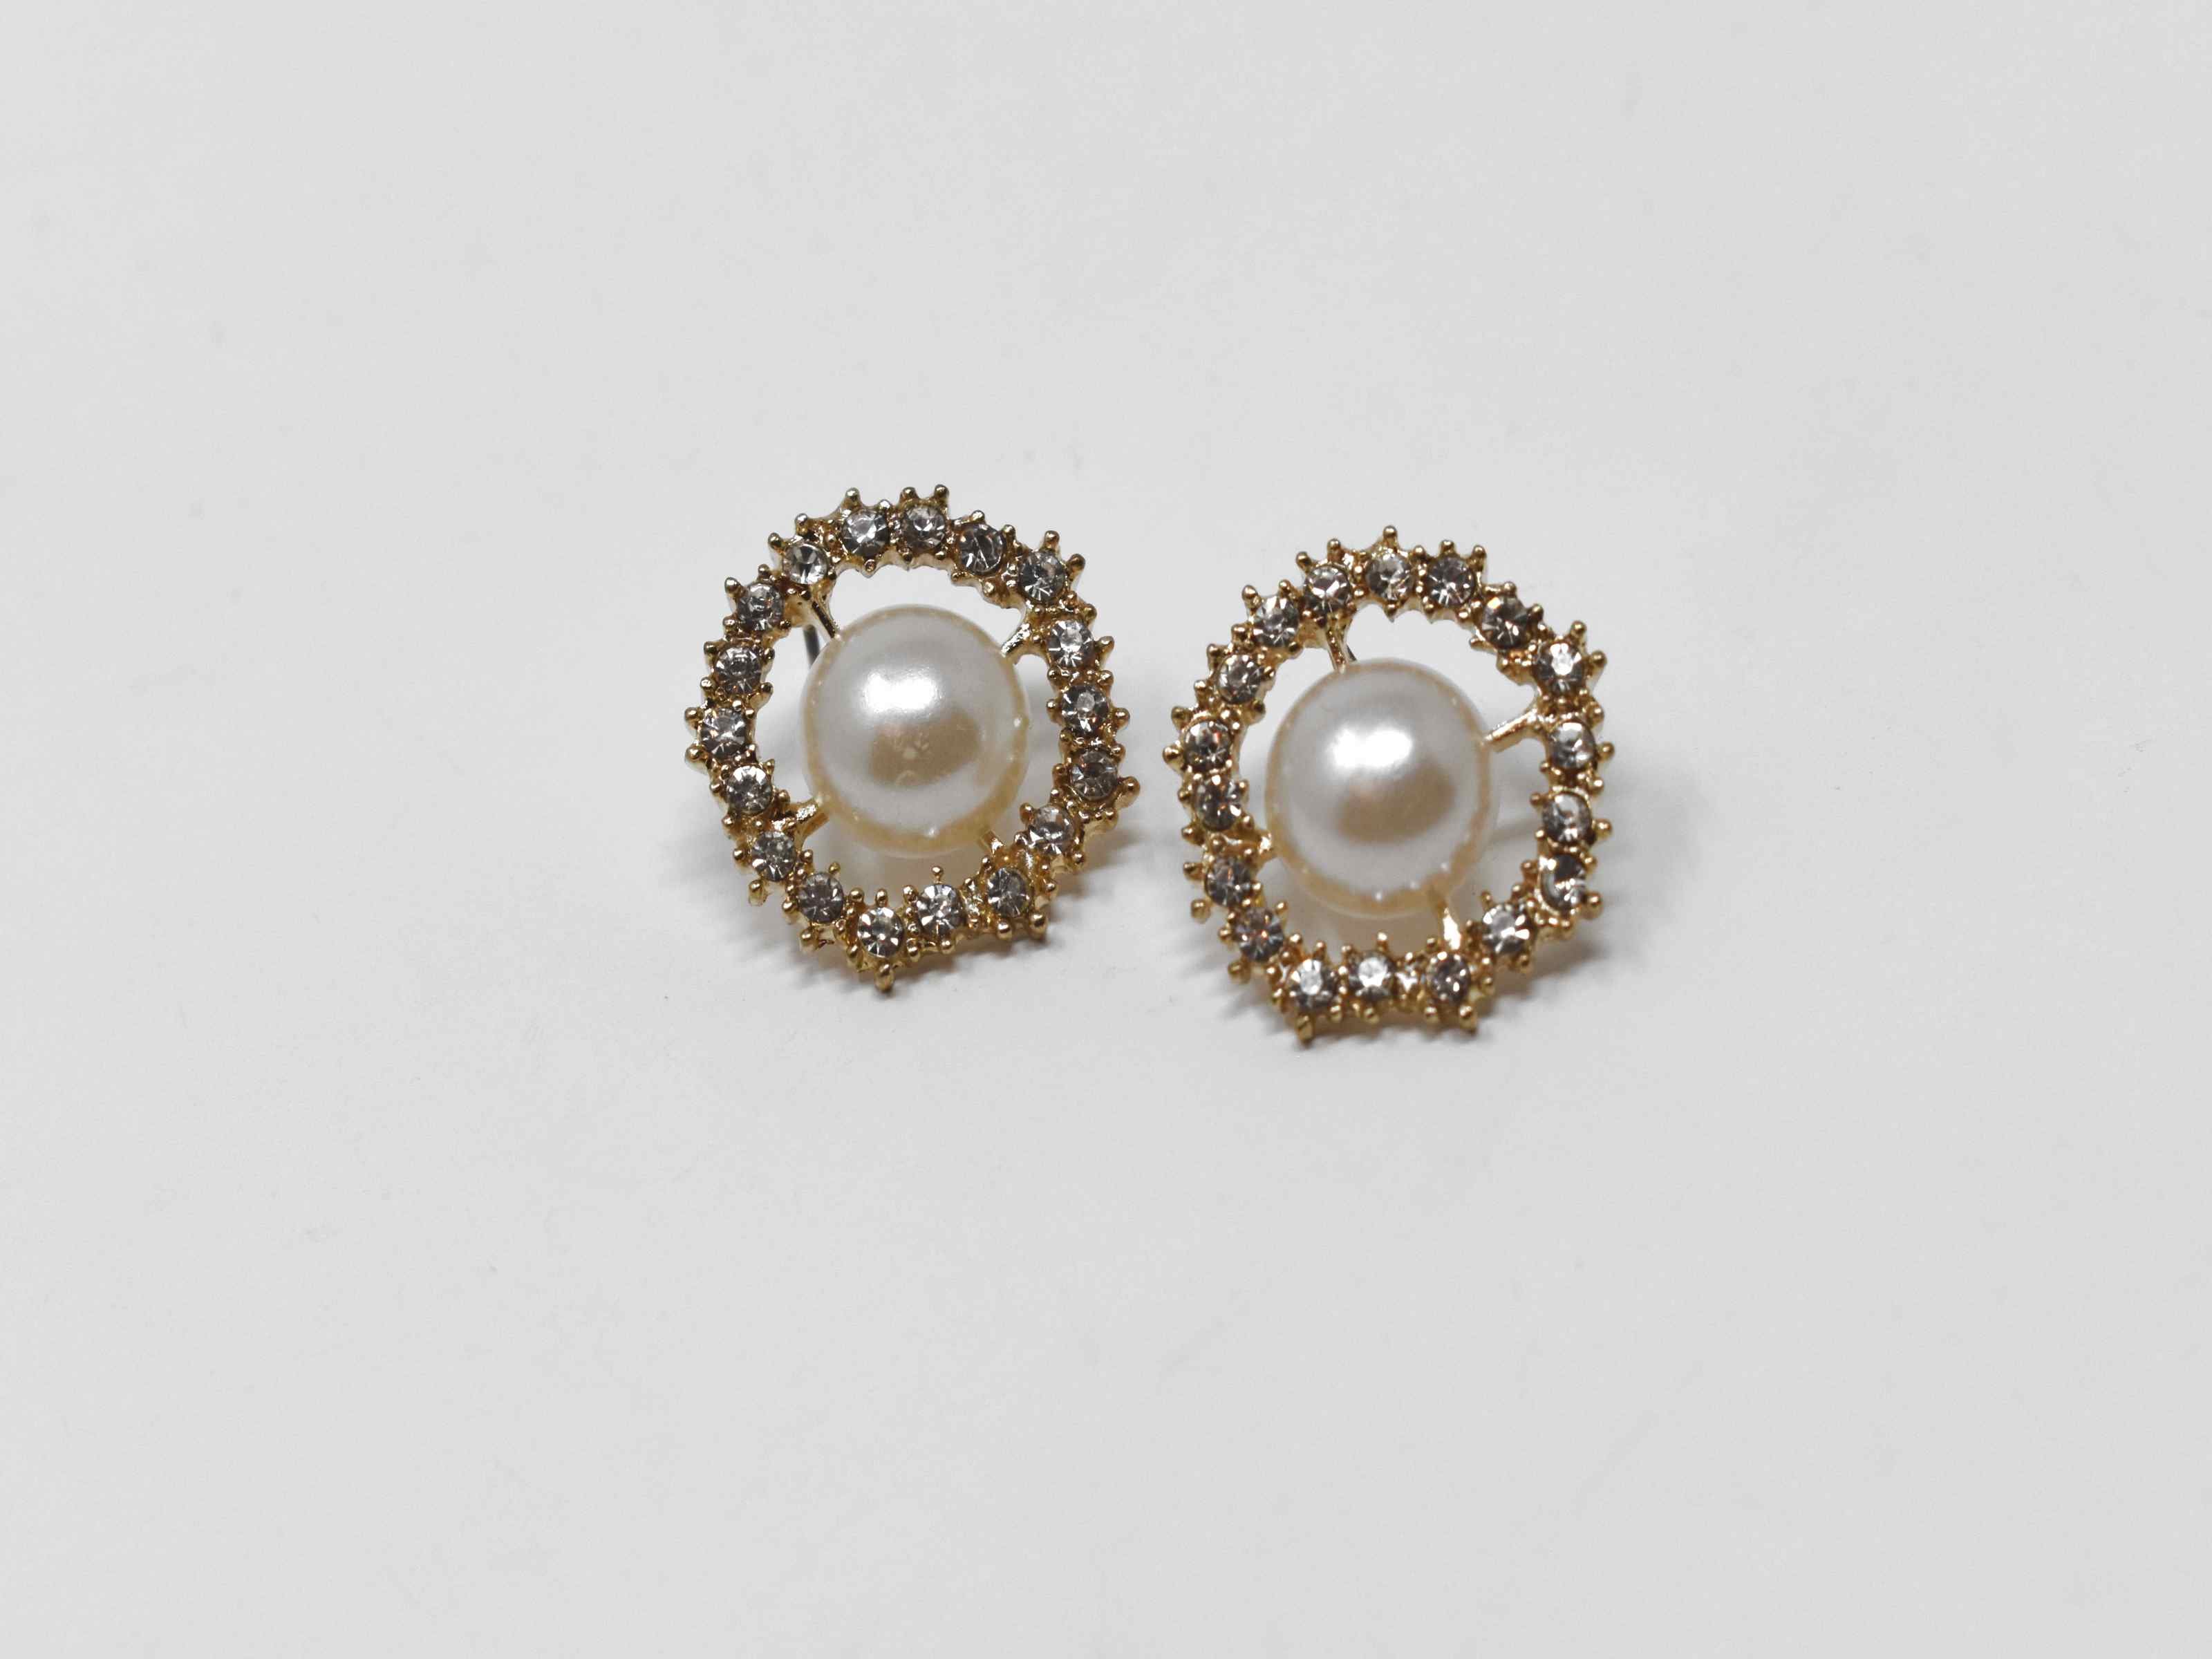 Our dietes earrings are a must have staple with a burst of sparkle. These earrings are a gold tone with a pearl core surrounded by a beautiful halo of stones. They are 3/4 inches in length with a push back clasp.